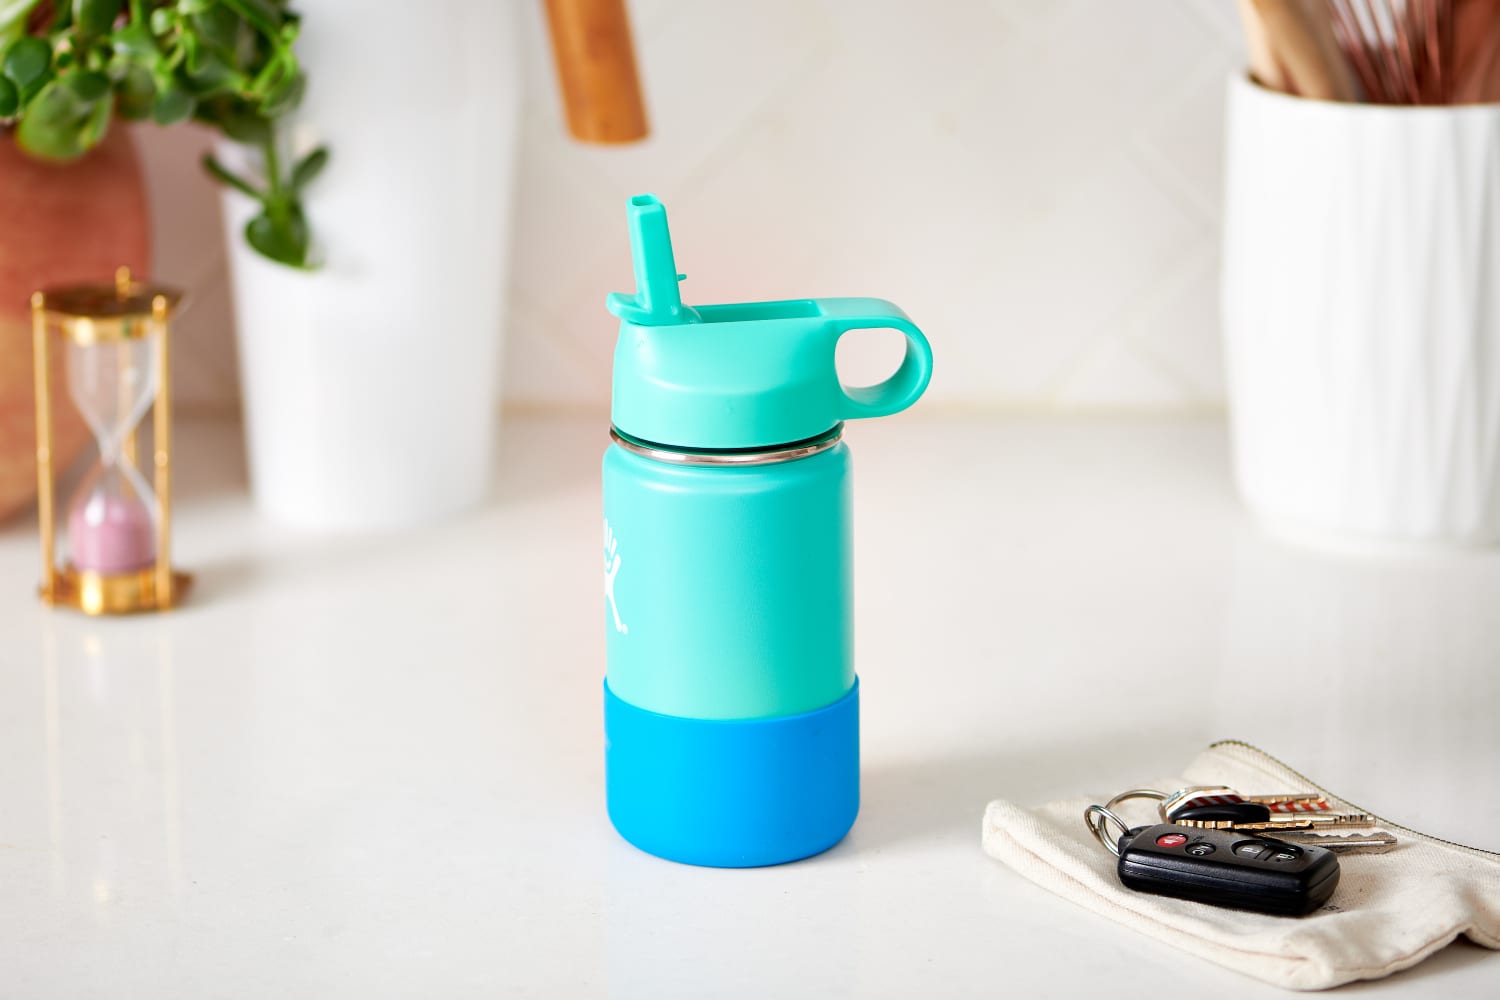 10 Editor-Favorite Water Bottles That’ll Actually Make You Want to Drink More Water